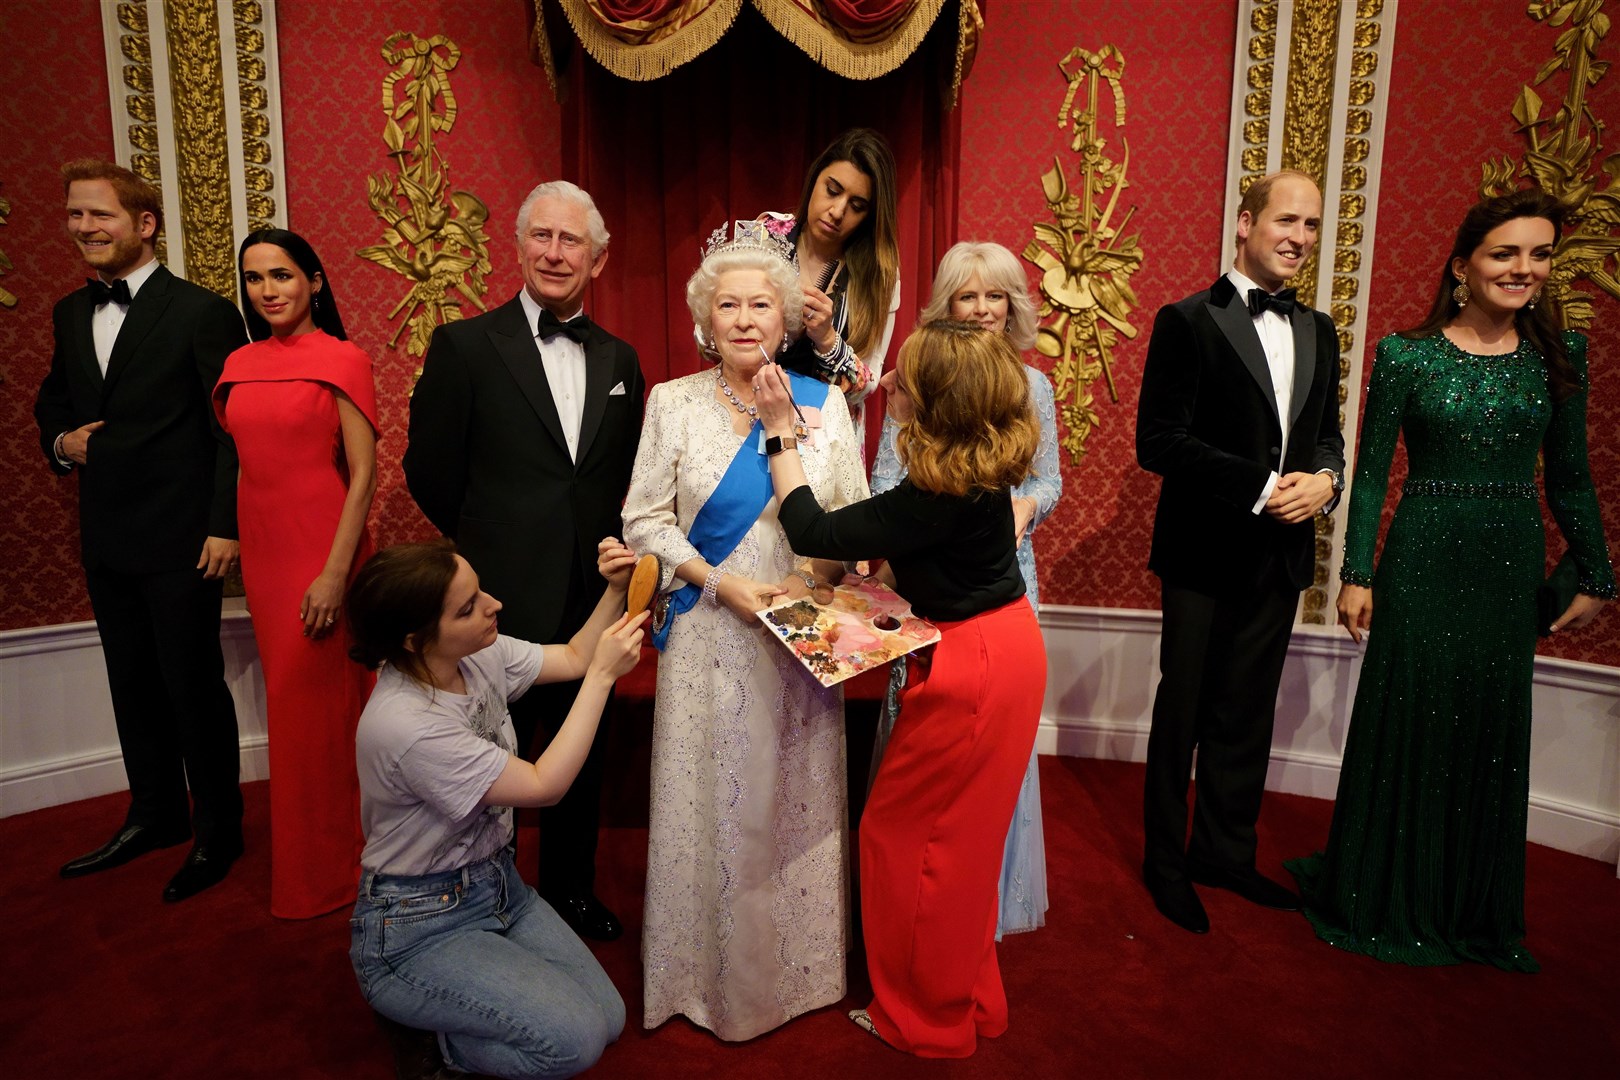 Studio artists Luisa Compobassi (left), Caryn Mitanni (back) and Jo Kinsey (right) make their final touches to the wax figure of Queen Elizabeth II at Madame Tussauds London ahead the Platinum Jubilee celebrations. (PA)